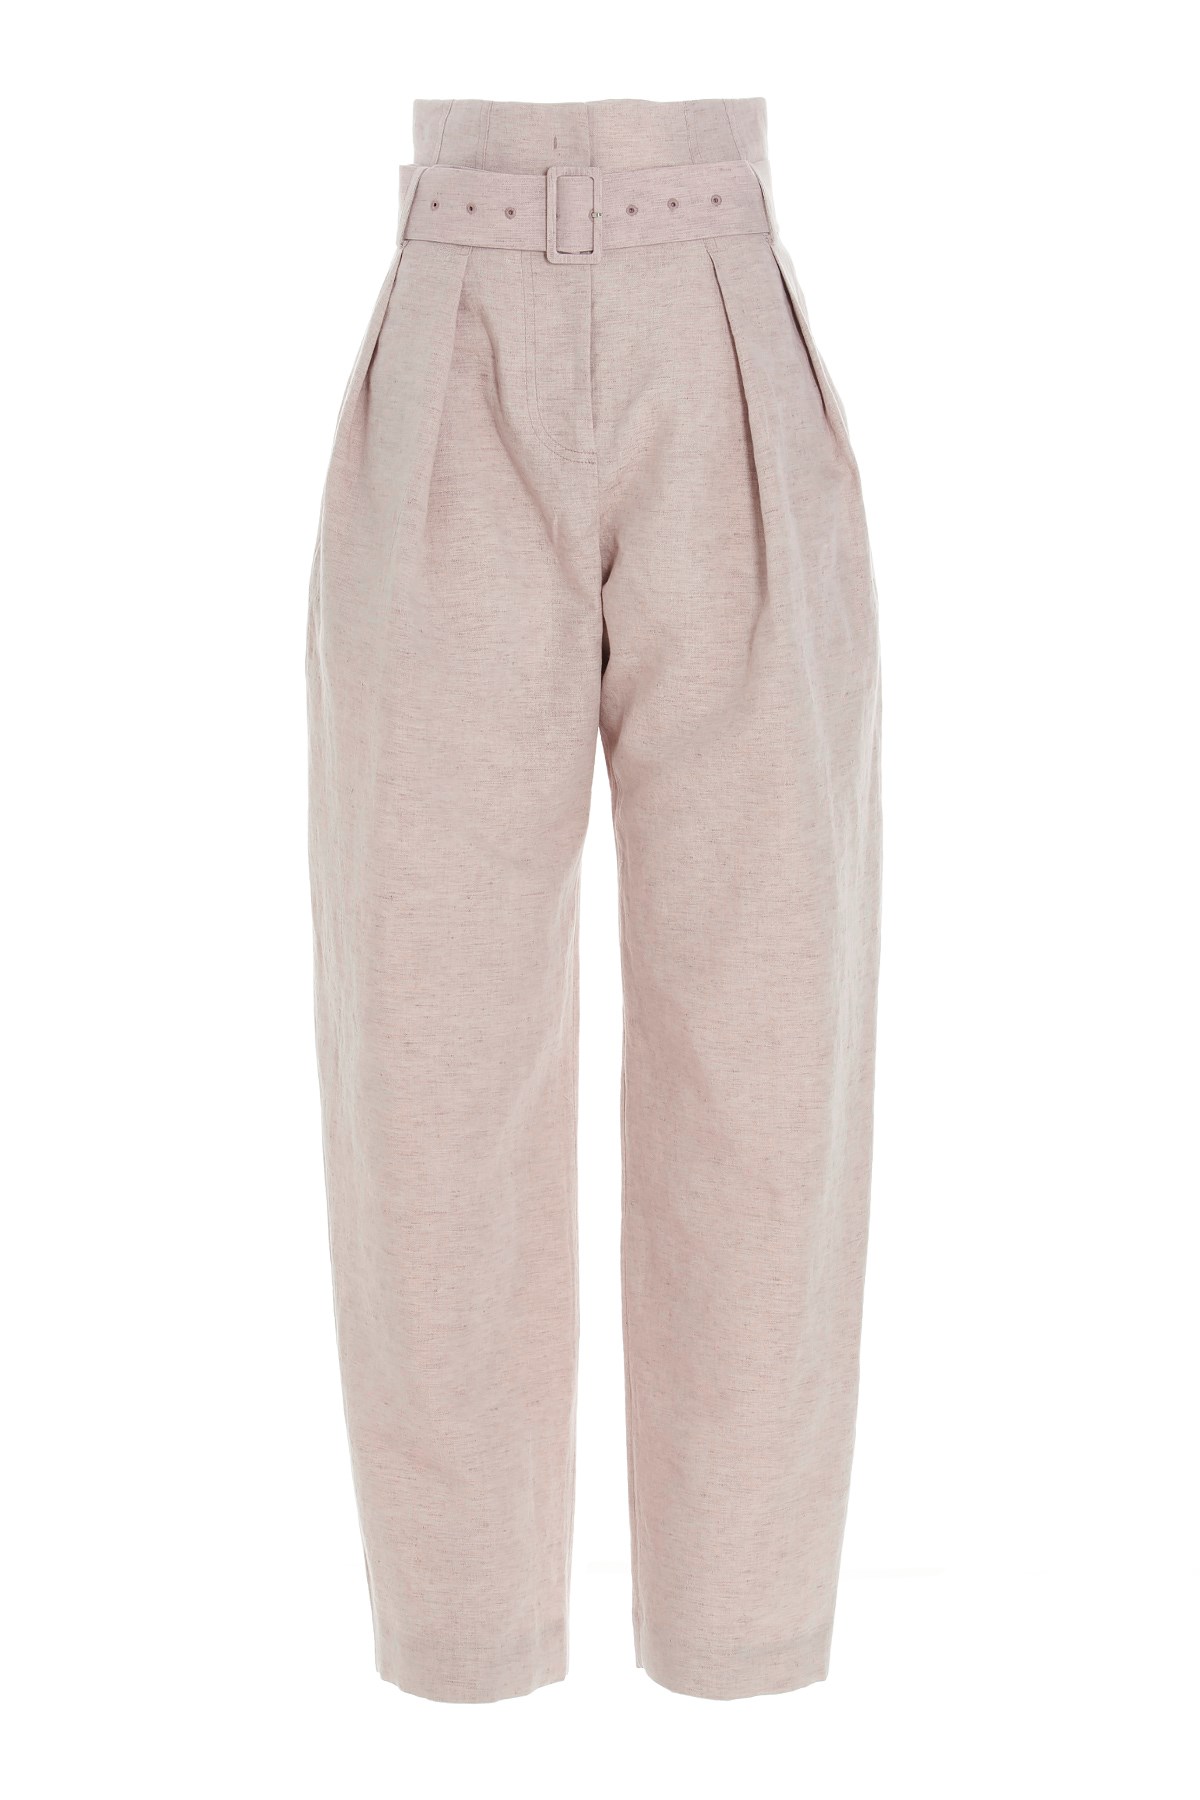 LOW CLASSIC 'Wide Tuck' Pants